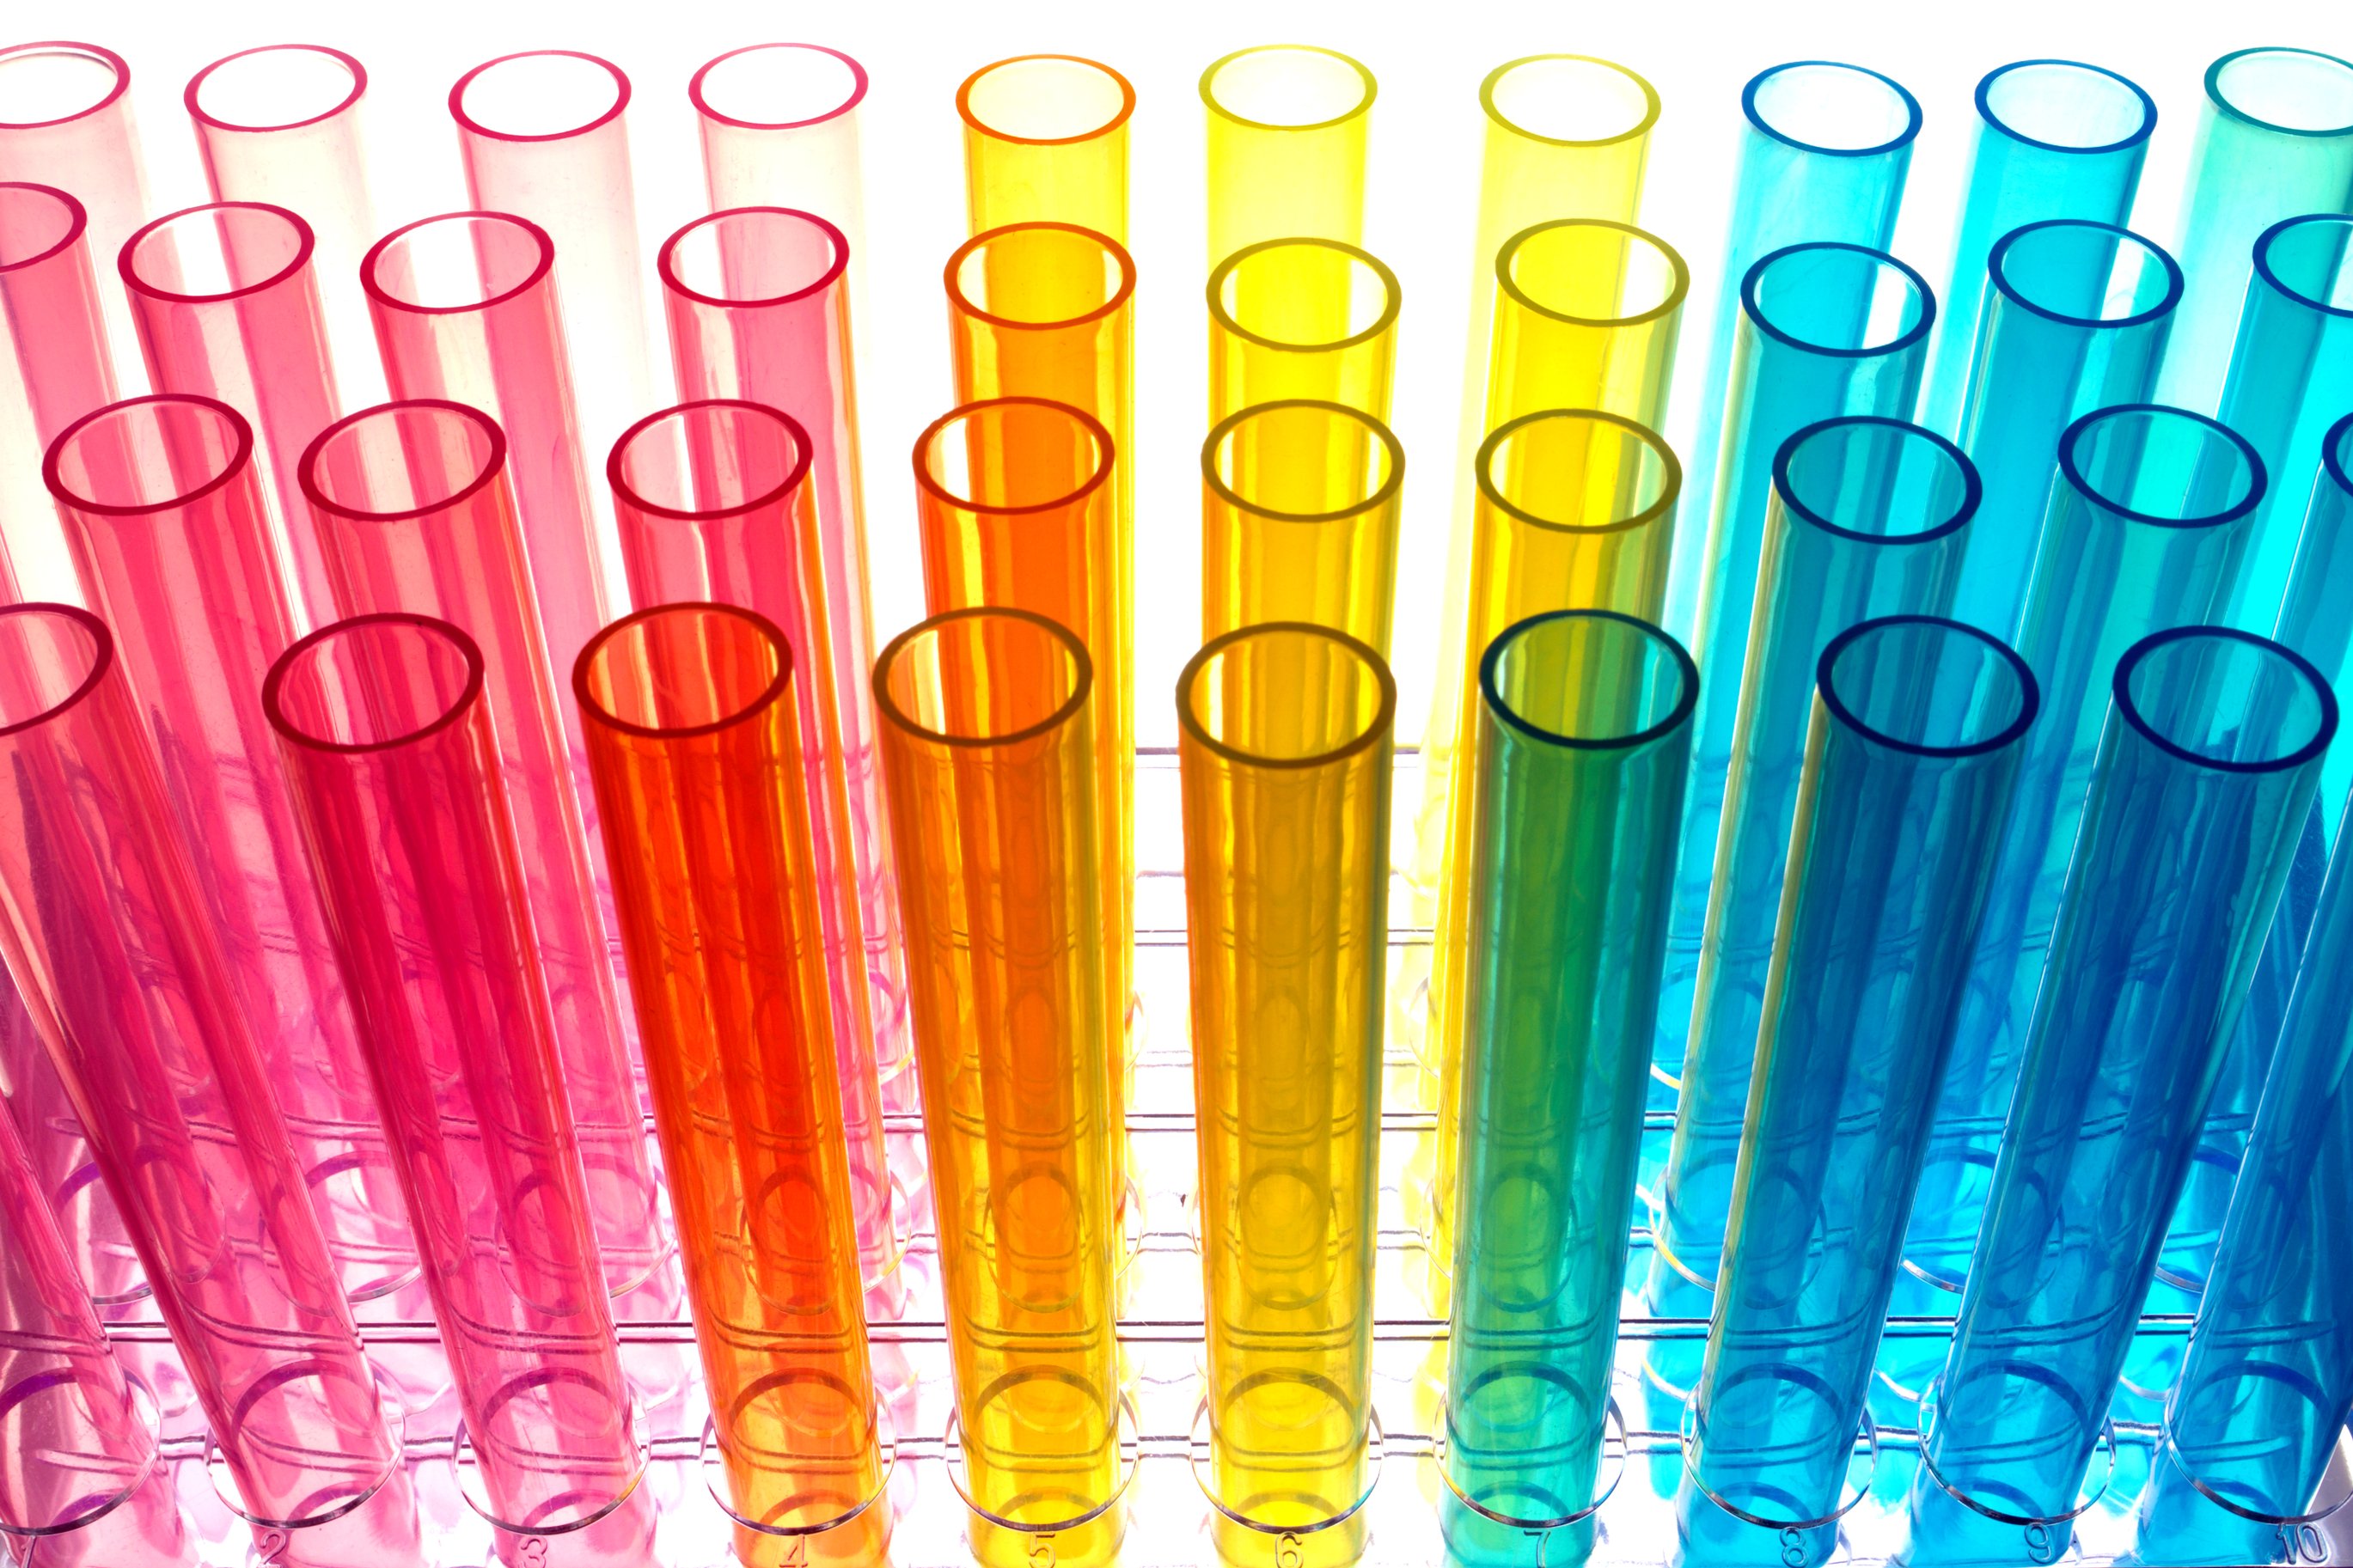 test, Tube, Abstract, Abstraction, Cylinder, Tubes, Glass, Bokek, Medical, Vials, Chemistry, Biology, Science Wallpaper